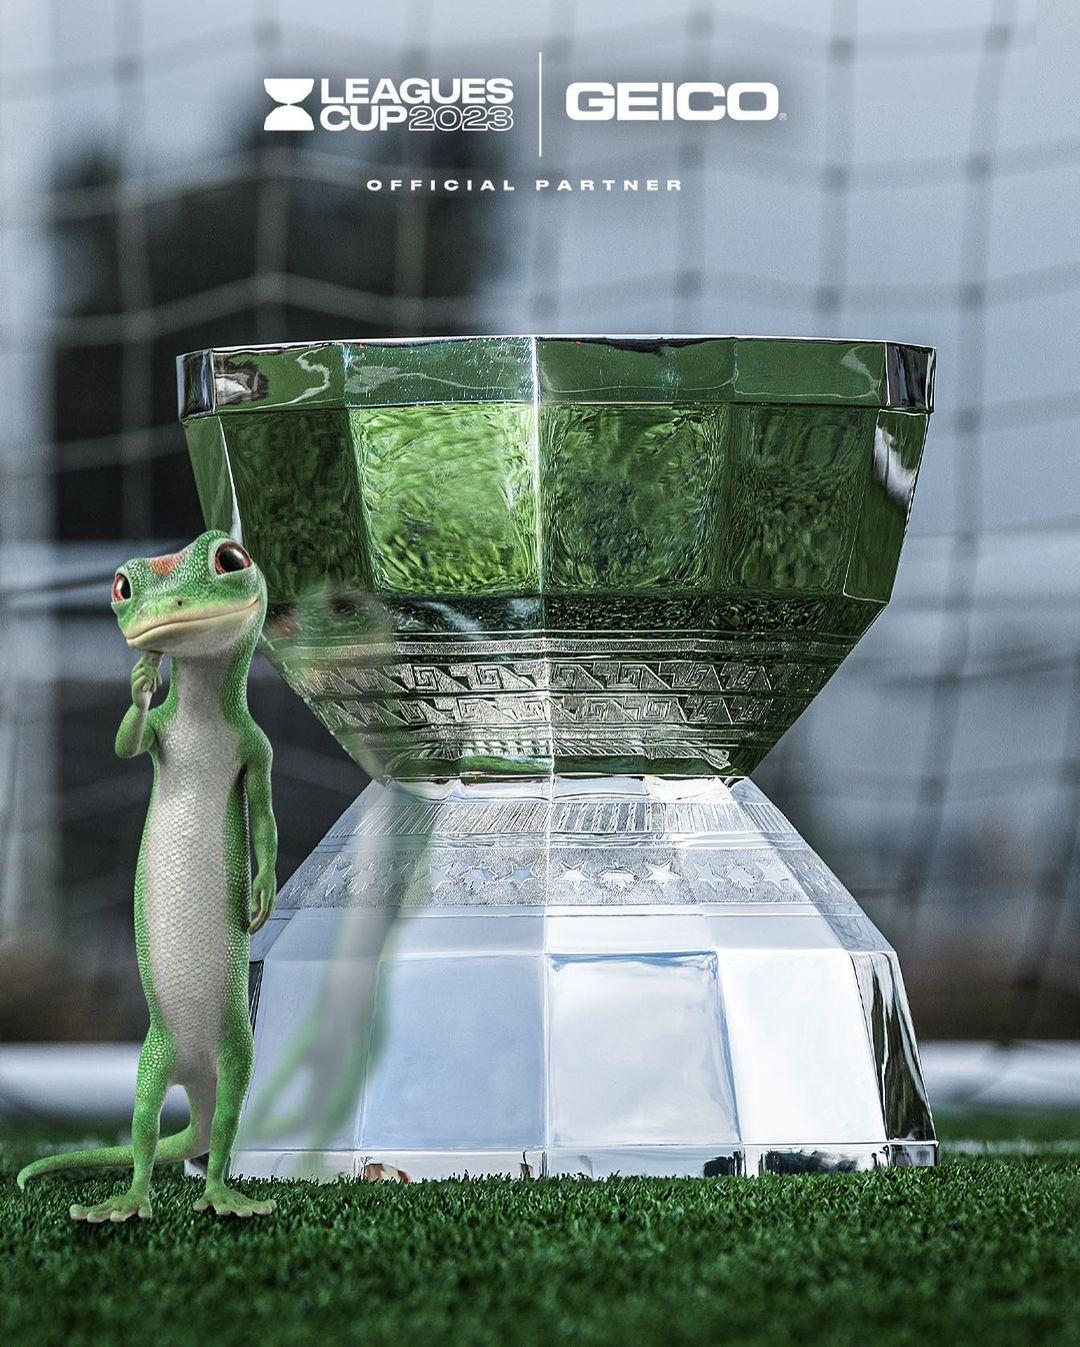 Gecko with Leagues Trophy